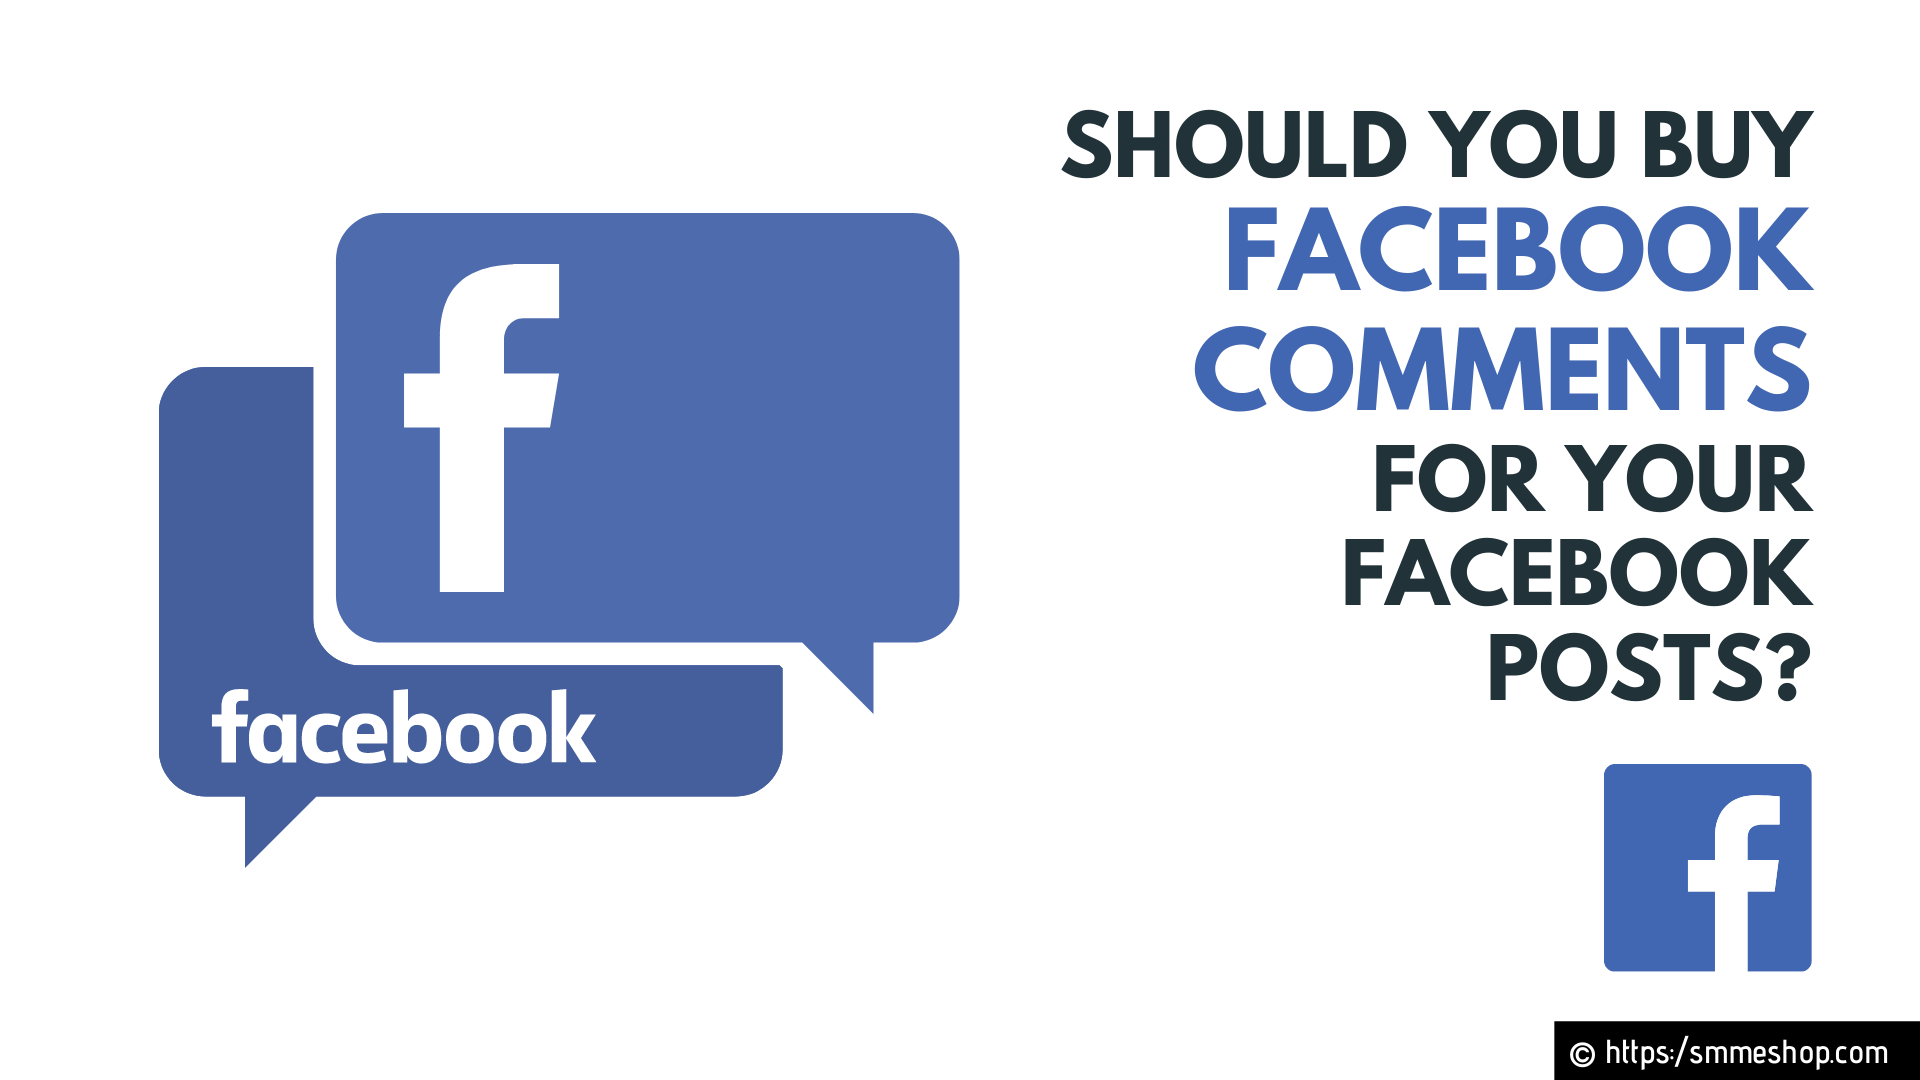 Should you Buy Facebook Comments for your Facebook Posts?